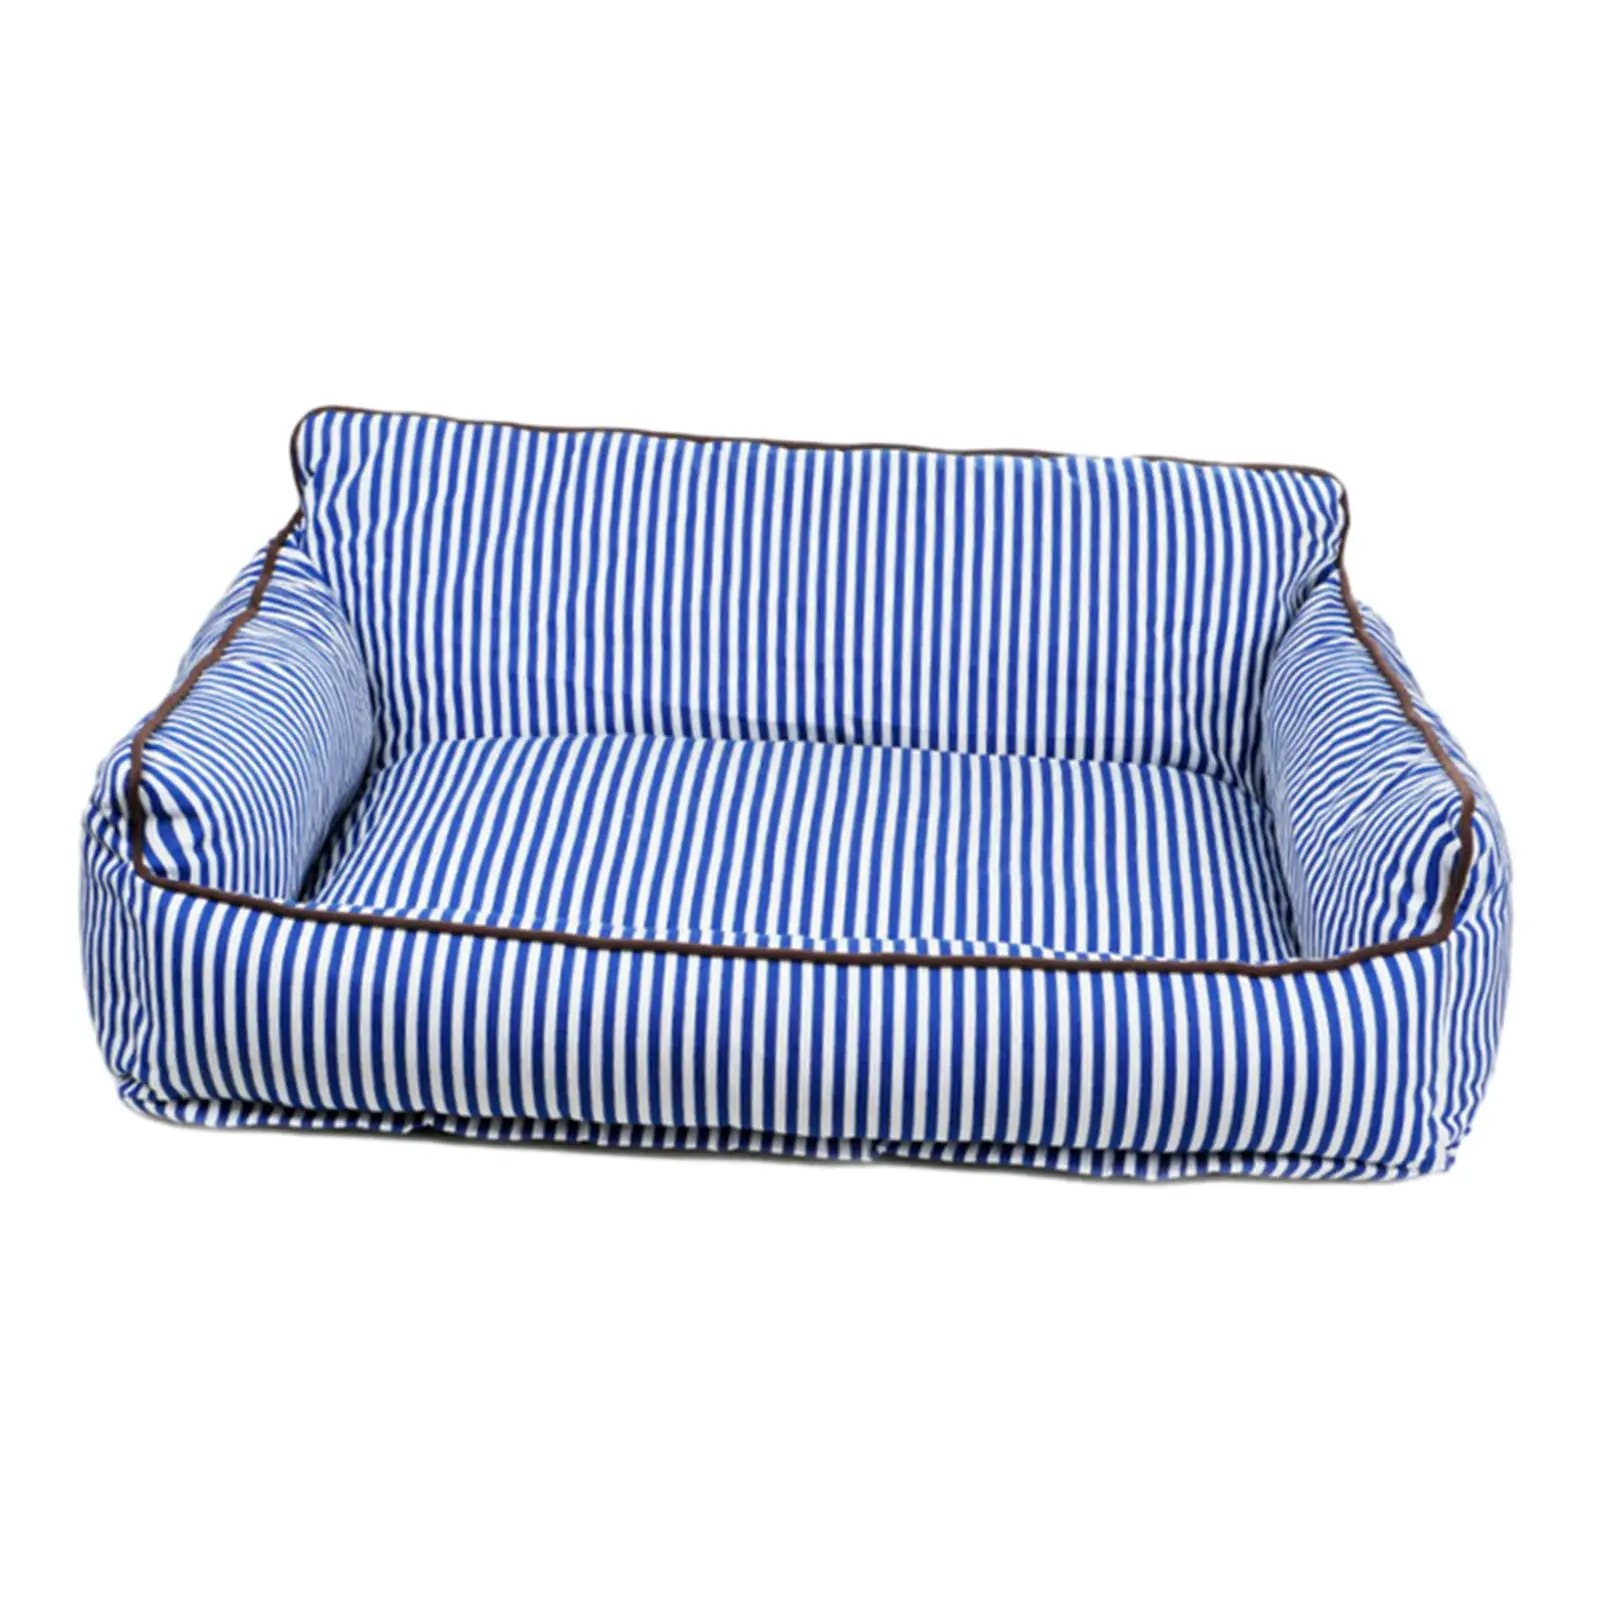 Cat Sofa Bed Dog Bed Puppy Nonslip Bottom with Zipper Indoor Cats Nest Pet Couch